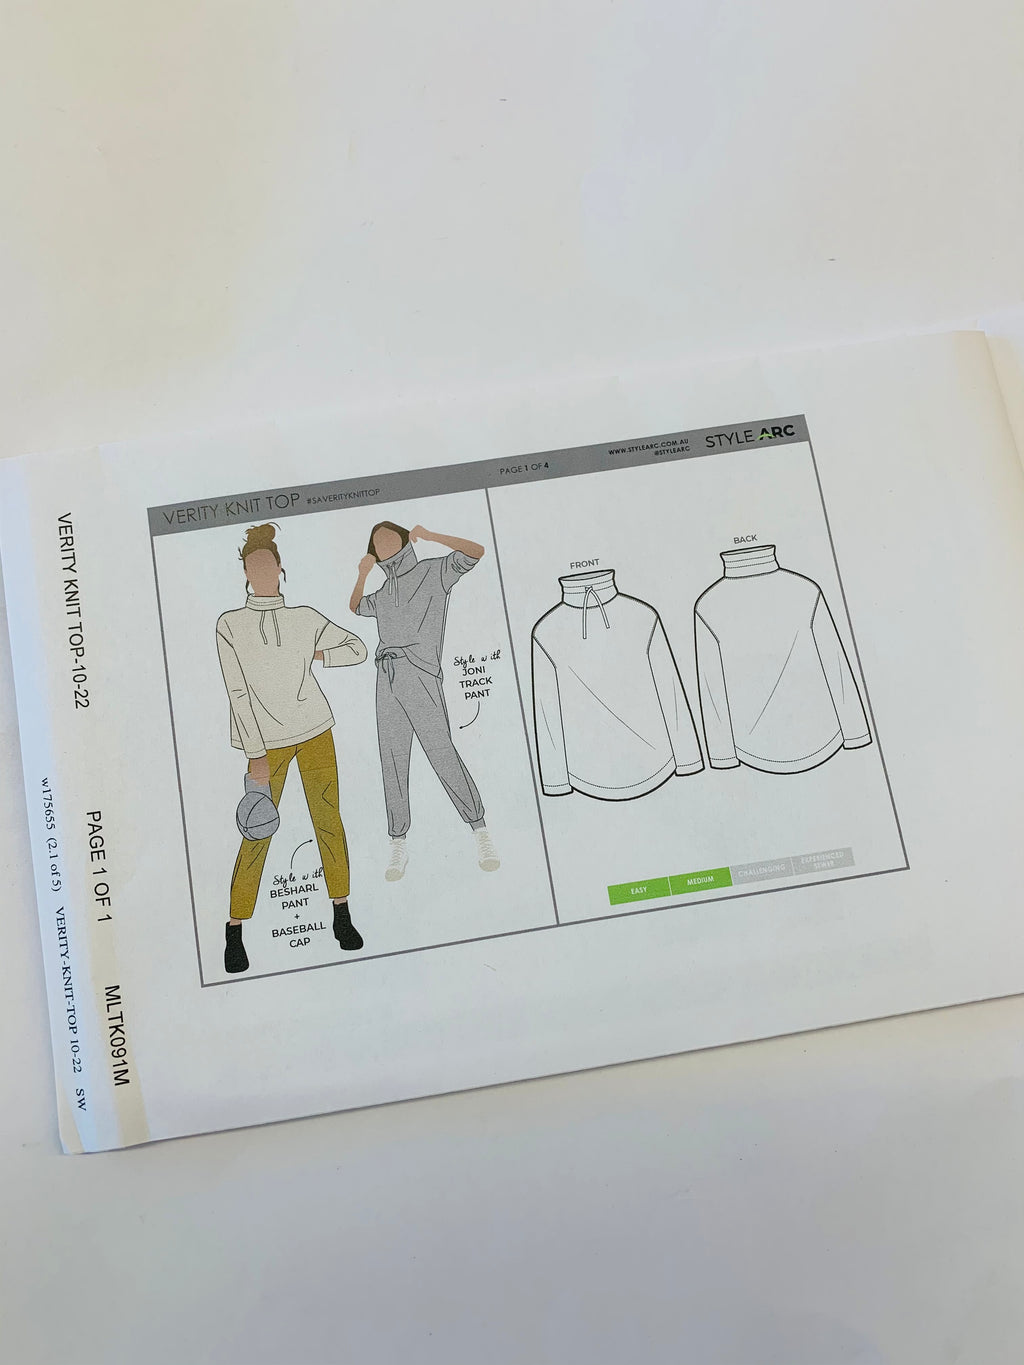 Style Arc: Verity Knit Top Sewing Pattern